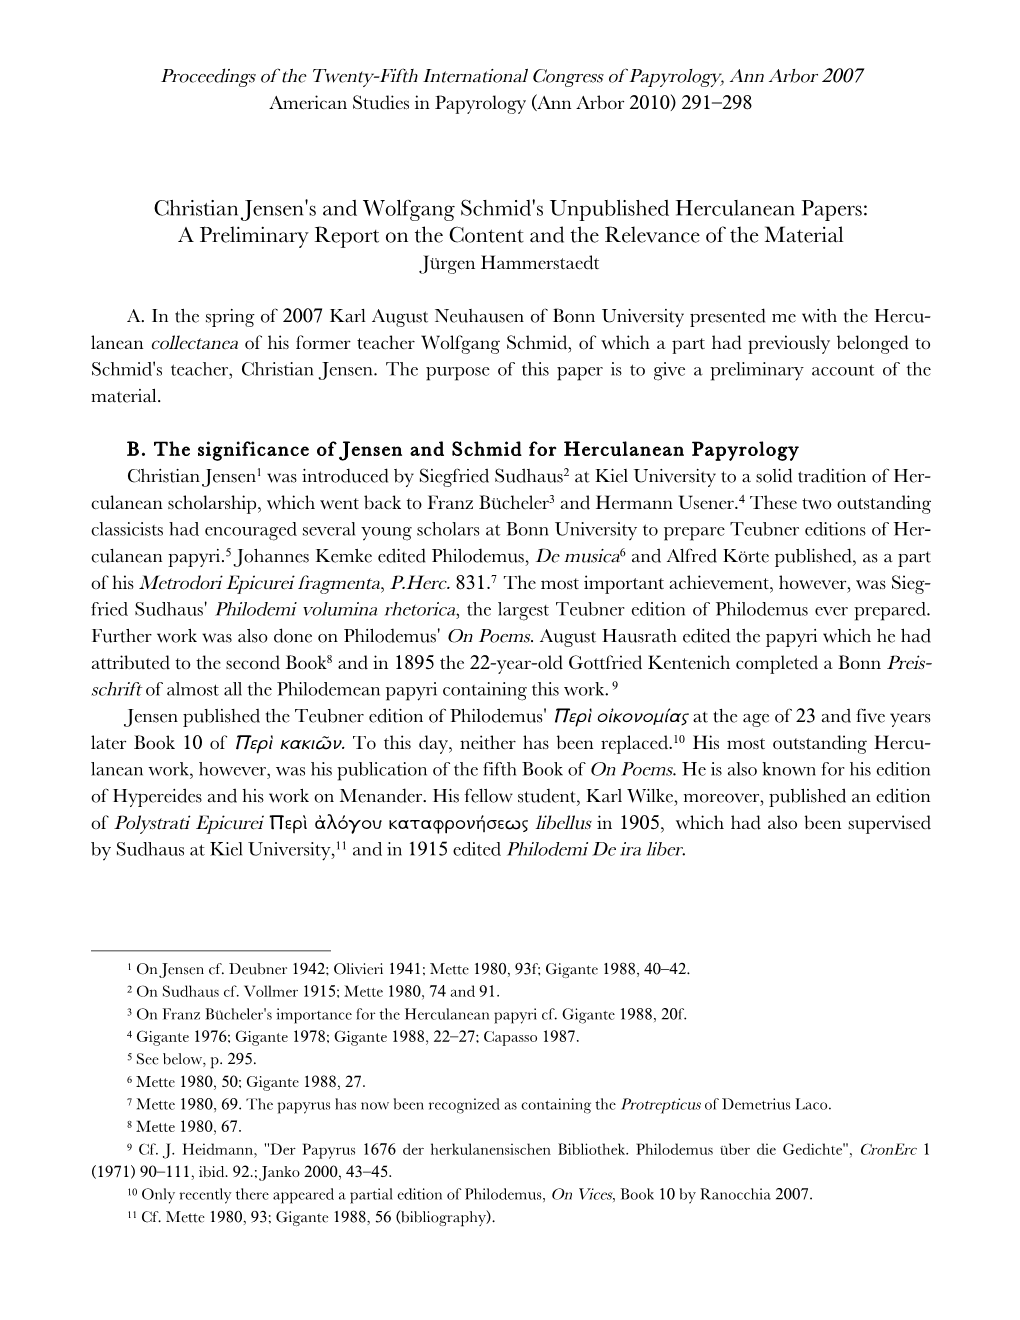 Christian Jensen's and Wolfgang Schmid's Unpublished Herculanean Papers: a Preliminary Report on the Content and the Relevance of the Material Jürgen Hammerstaedt